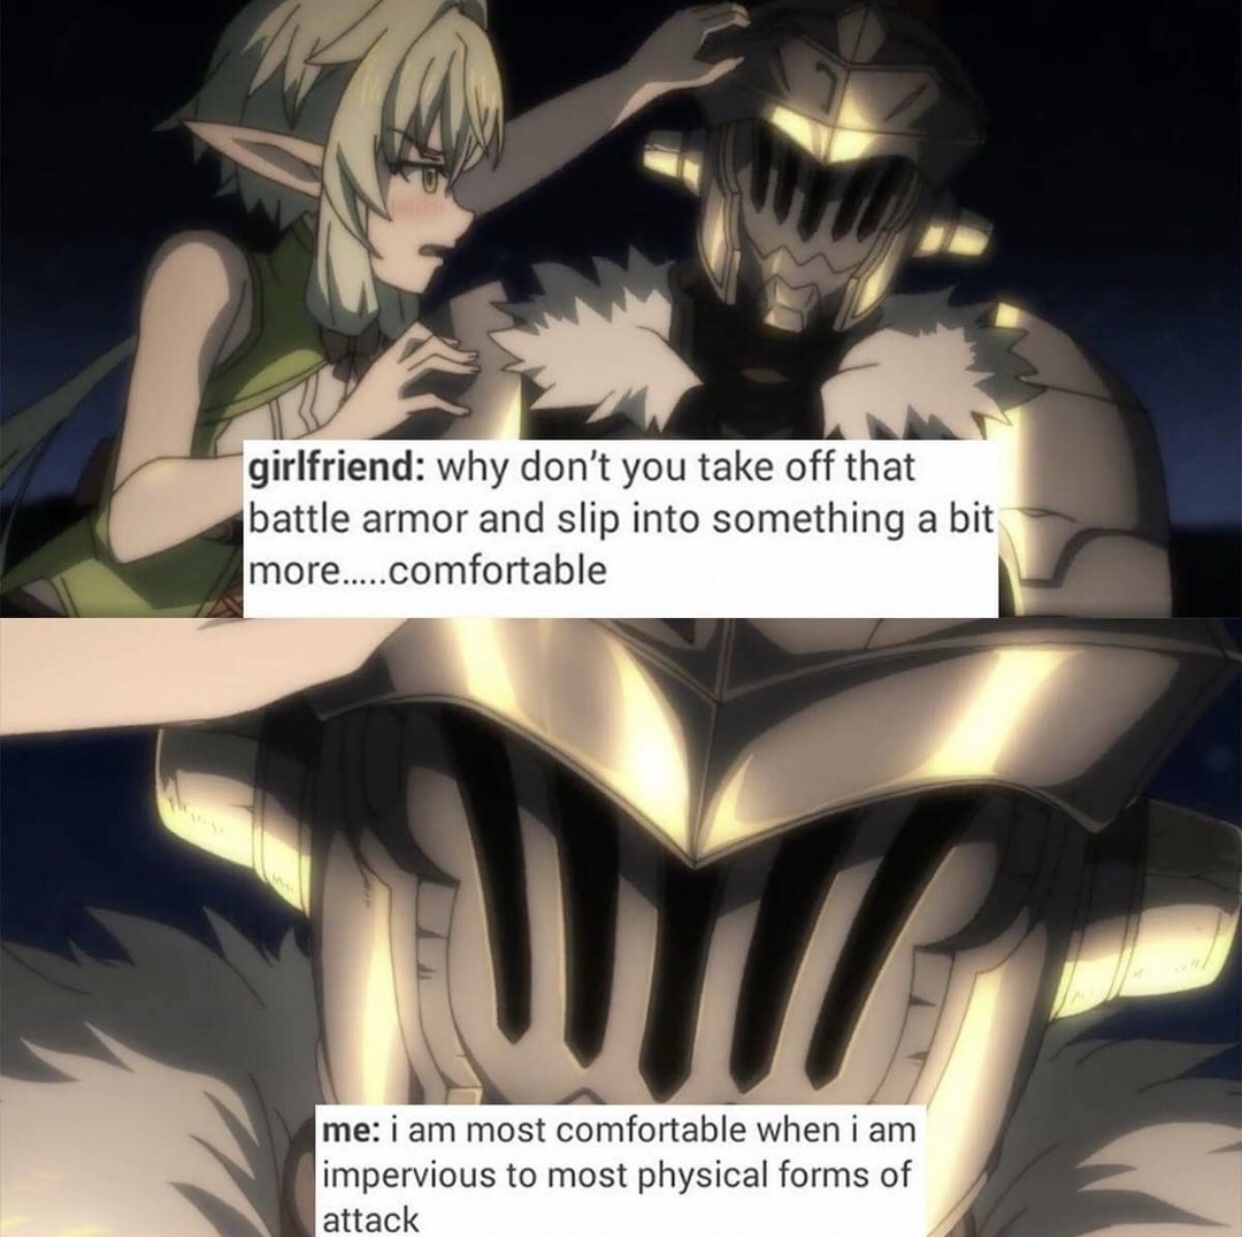 goblin slayer memes - girlfriend why don't you take off that battle armor and slip into something a bit more.....comfortable me i am most comfortable when i am impervious to most physical forms of attack